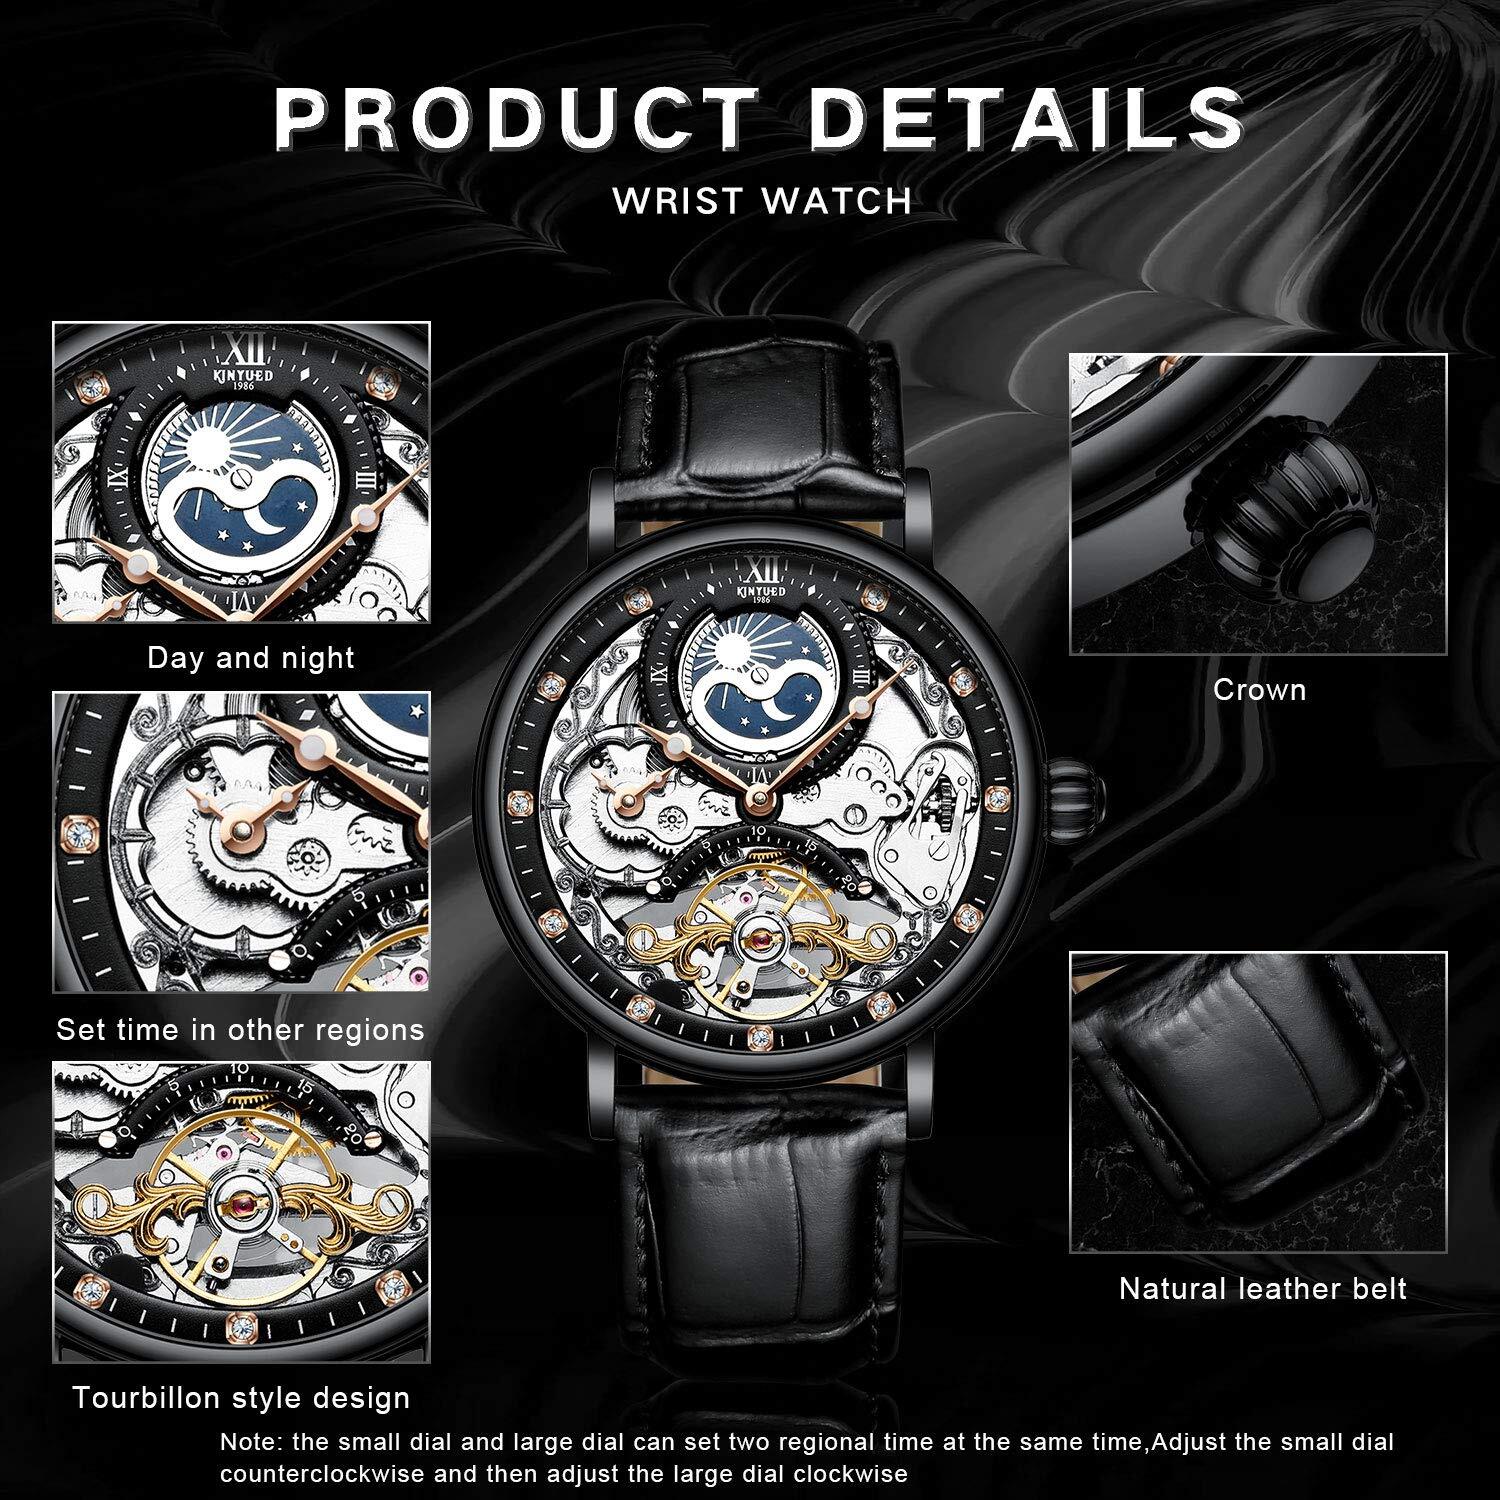 Mens Luxury Skeleton Automatic Mechanical Wrist Watches Leather Moon Phrase Luminous Hands Self-Wind Watch